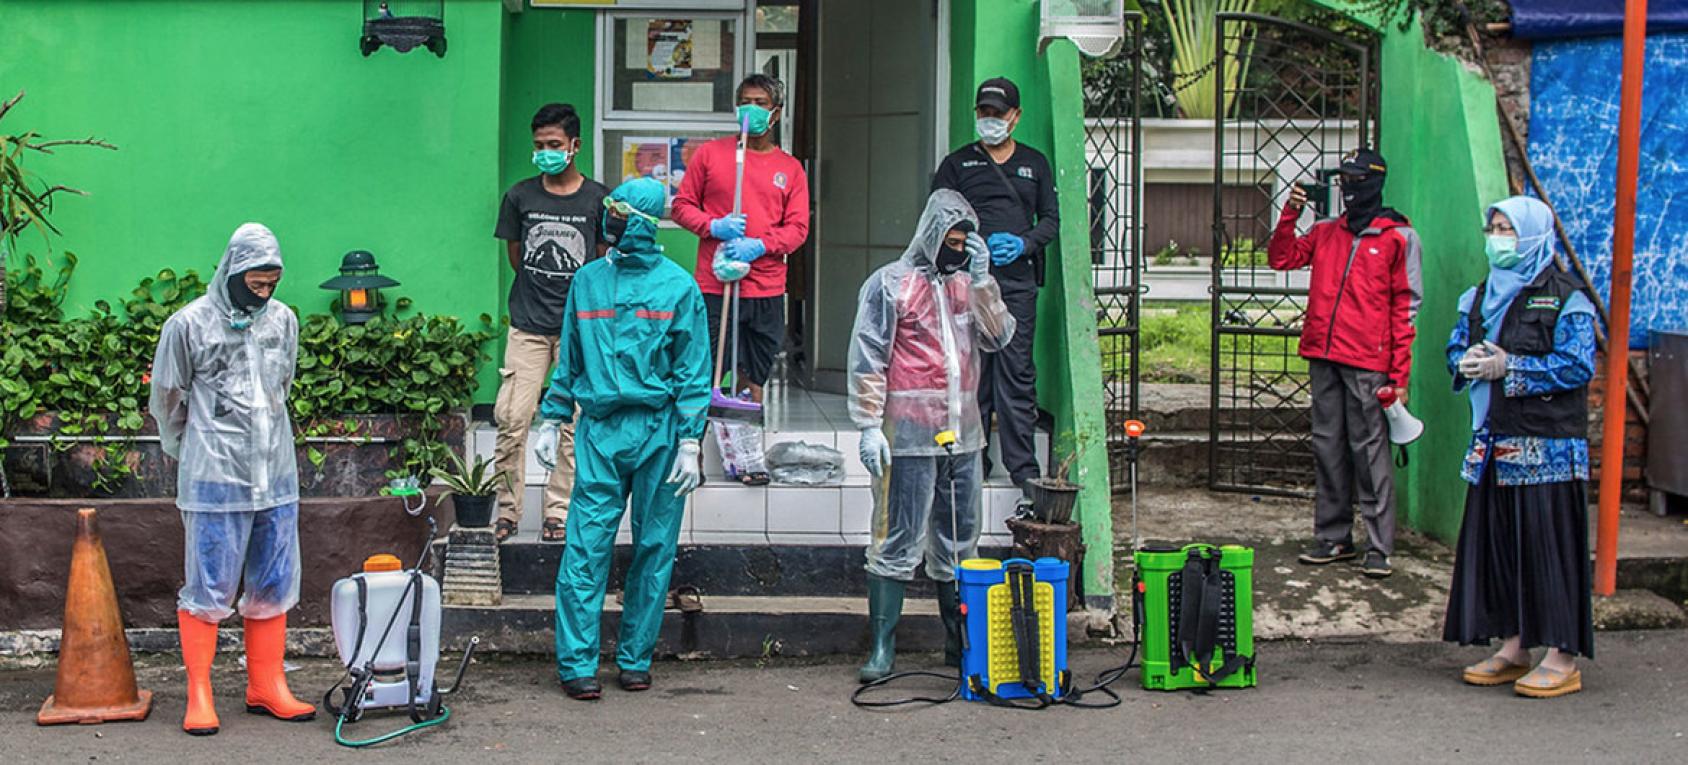 A group of people in full protective protective gear stand outside a building.